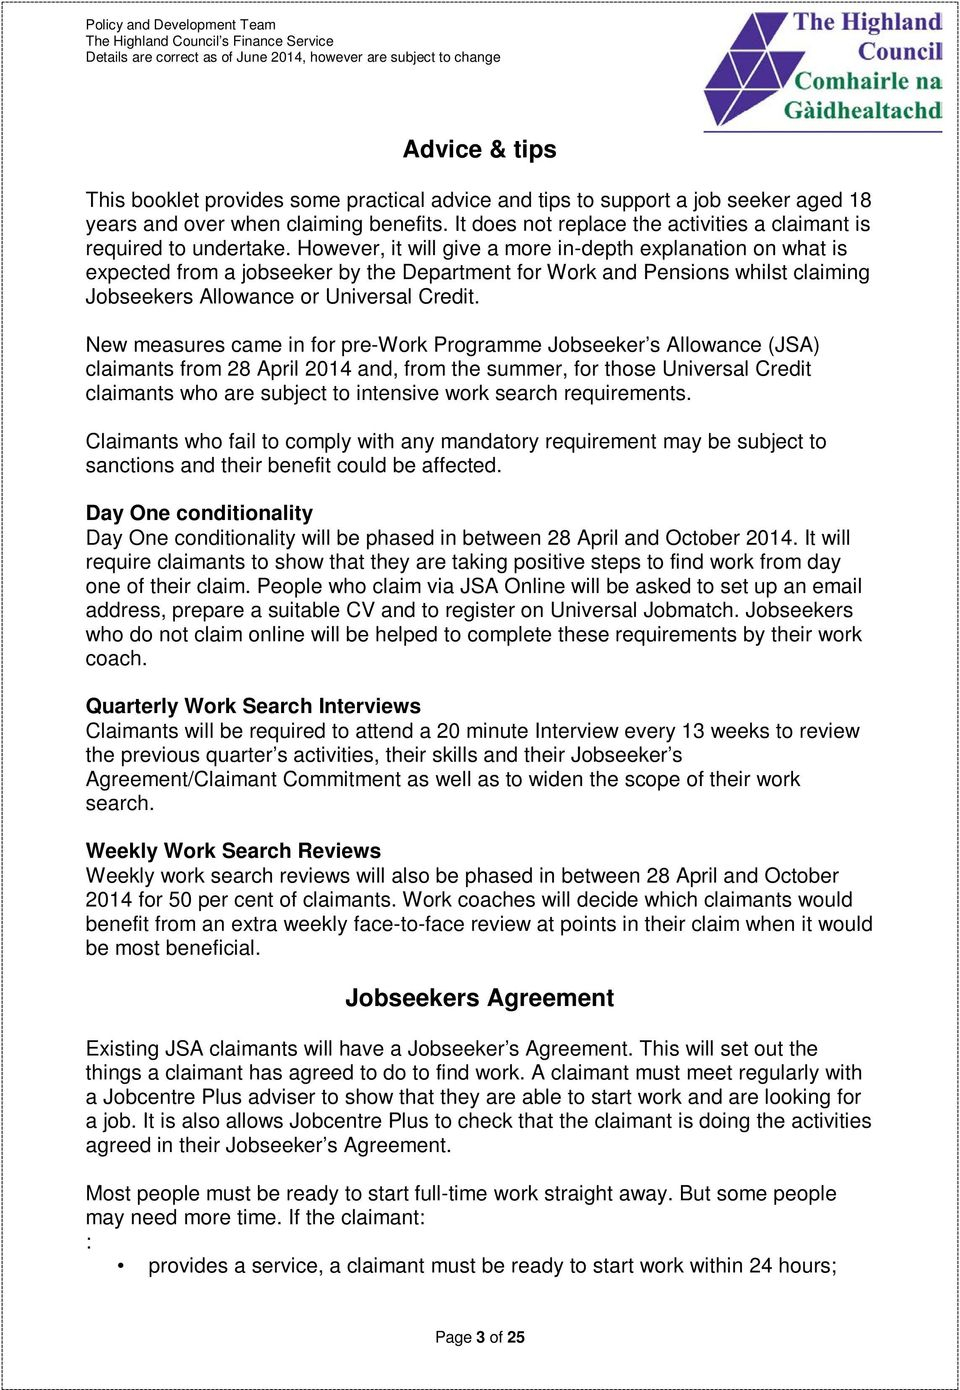 Job Seekers Agreement Customer Guide To Sanctions Practical Advice And Tips To Support